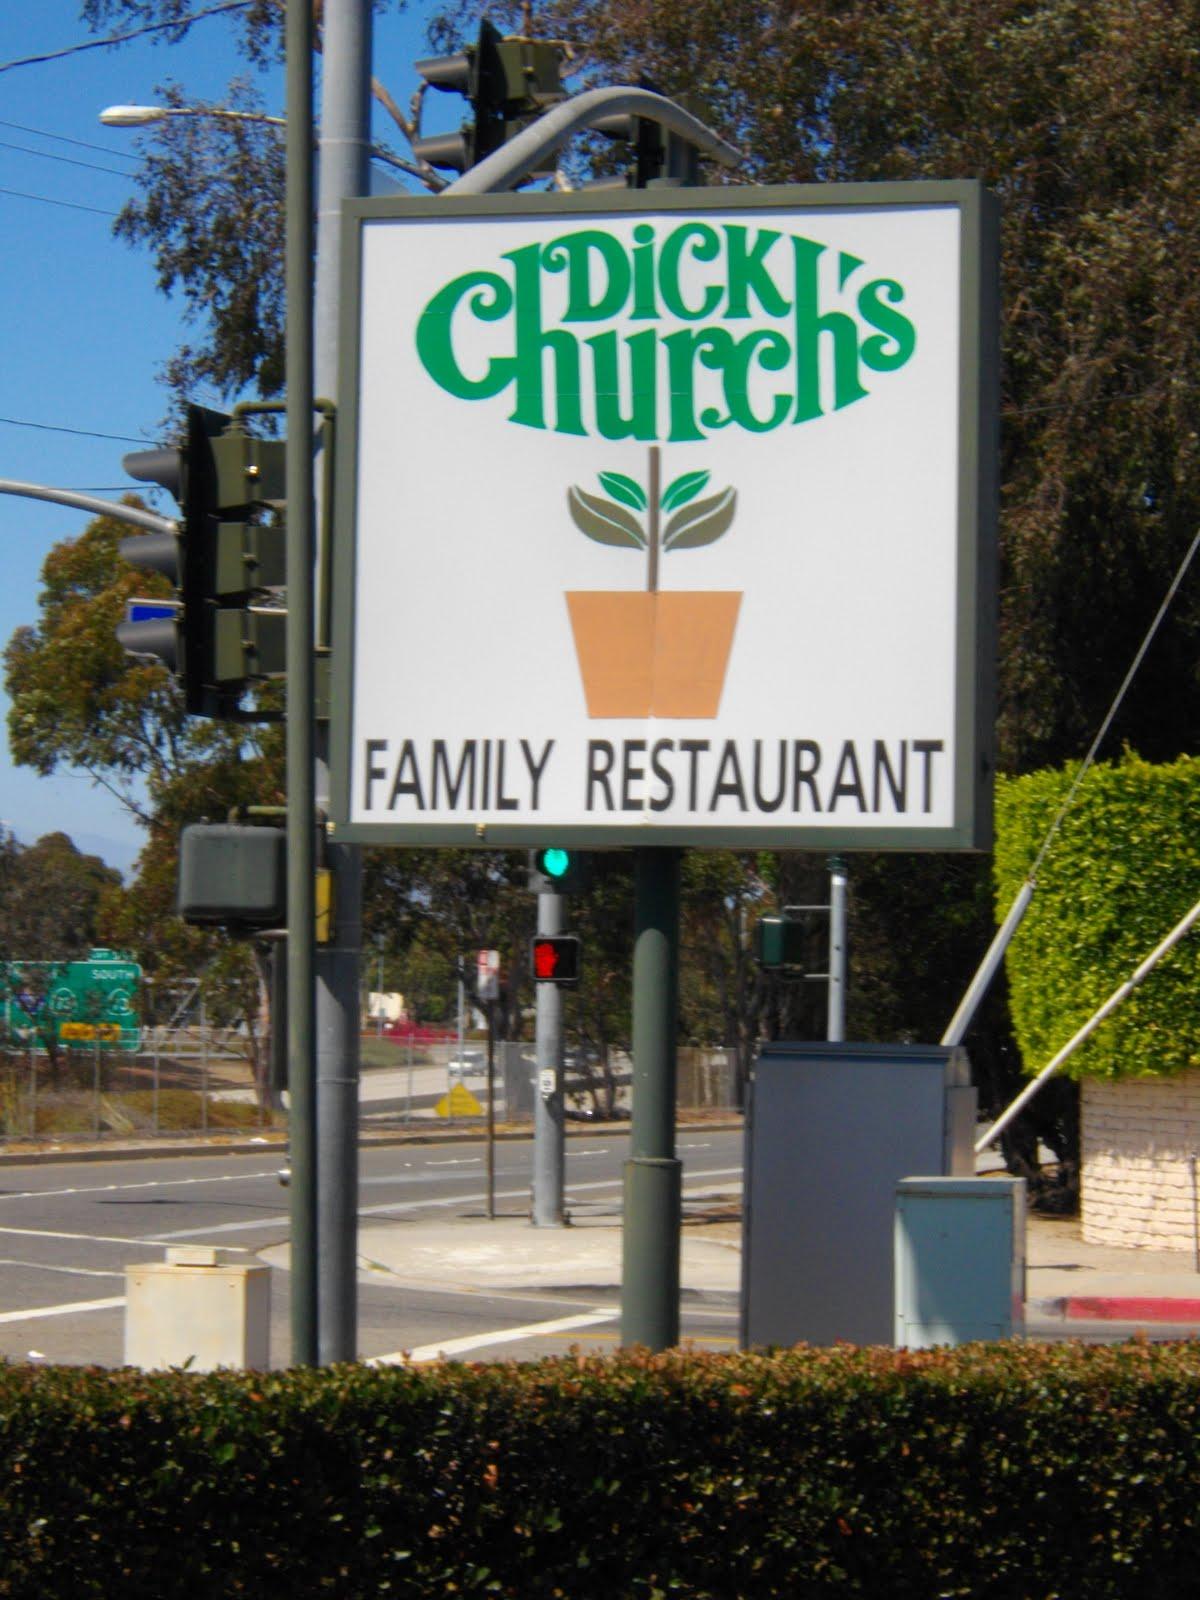 Church's with Restaurant Logo - Dinerwood: Los Angeles Diner Reviews: Dick Church's Restaurant-We